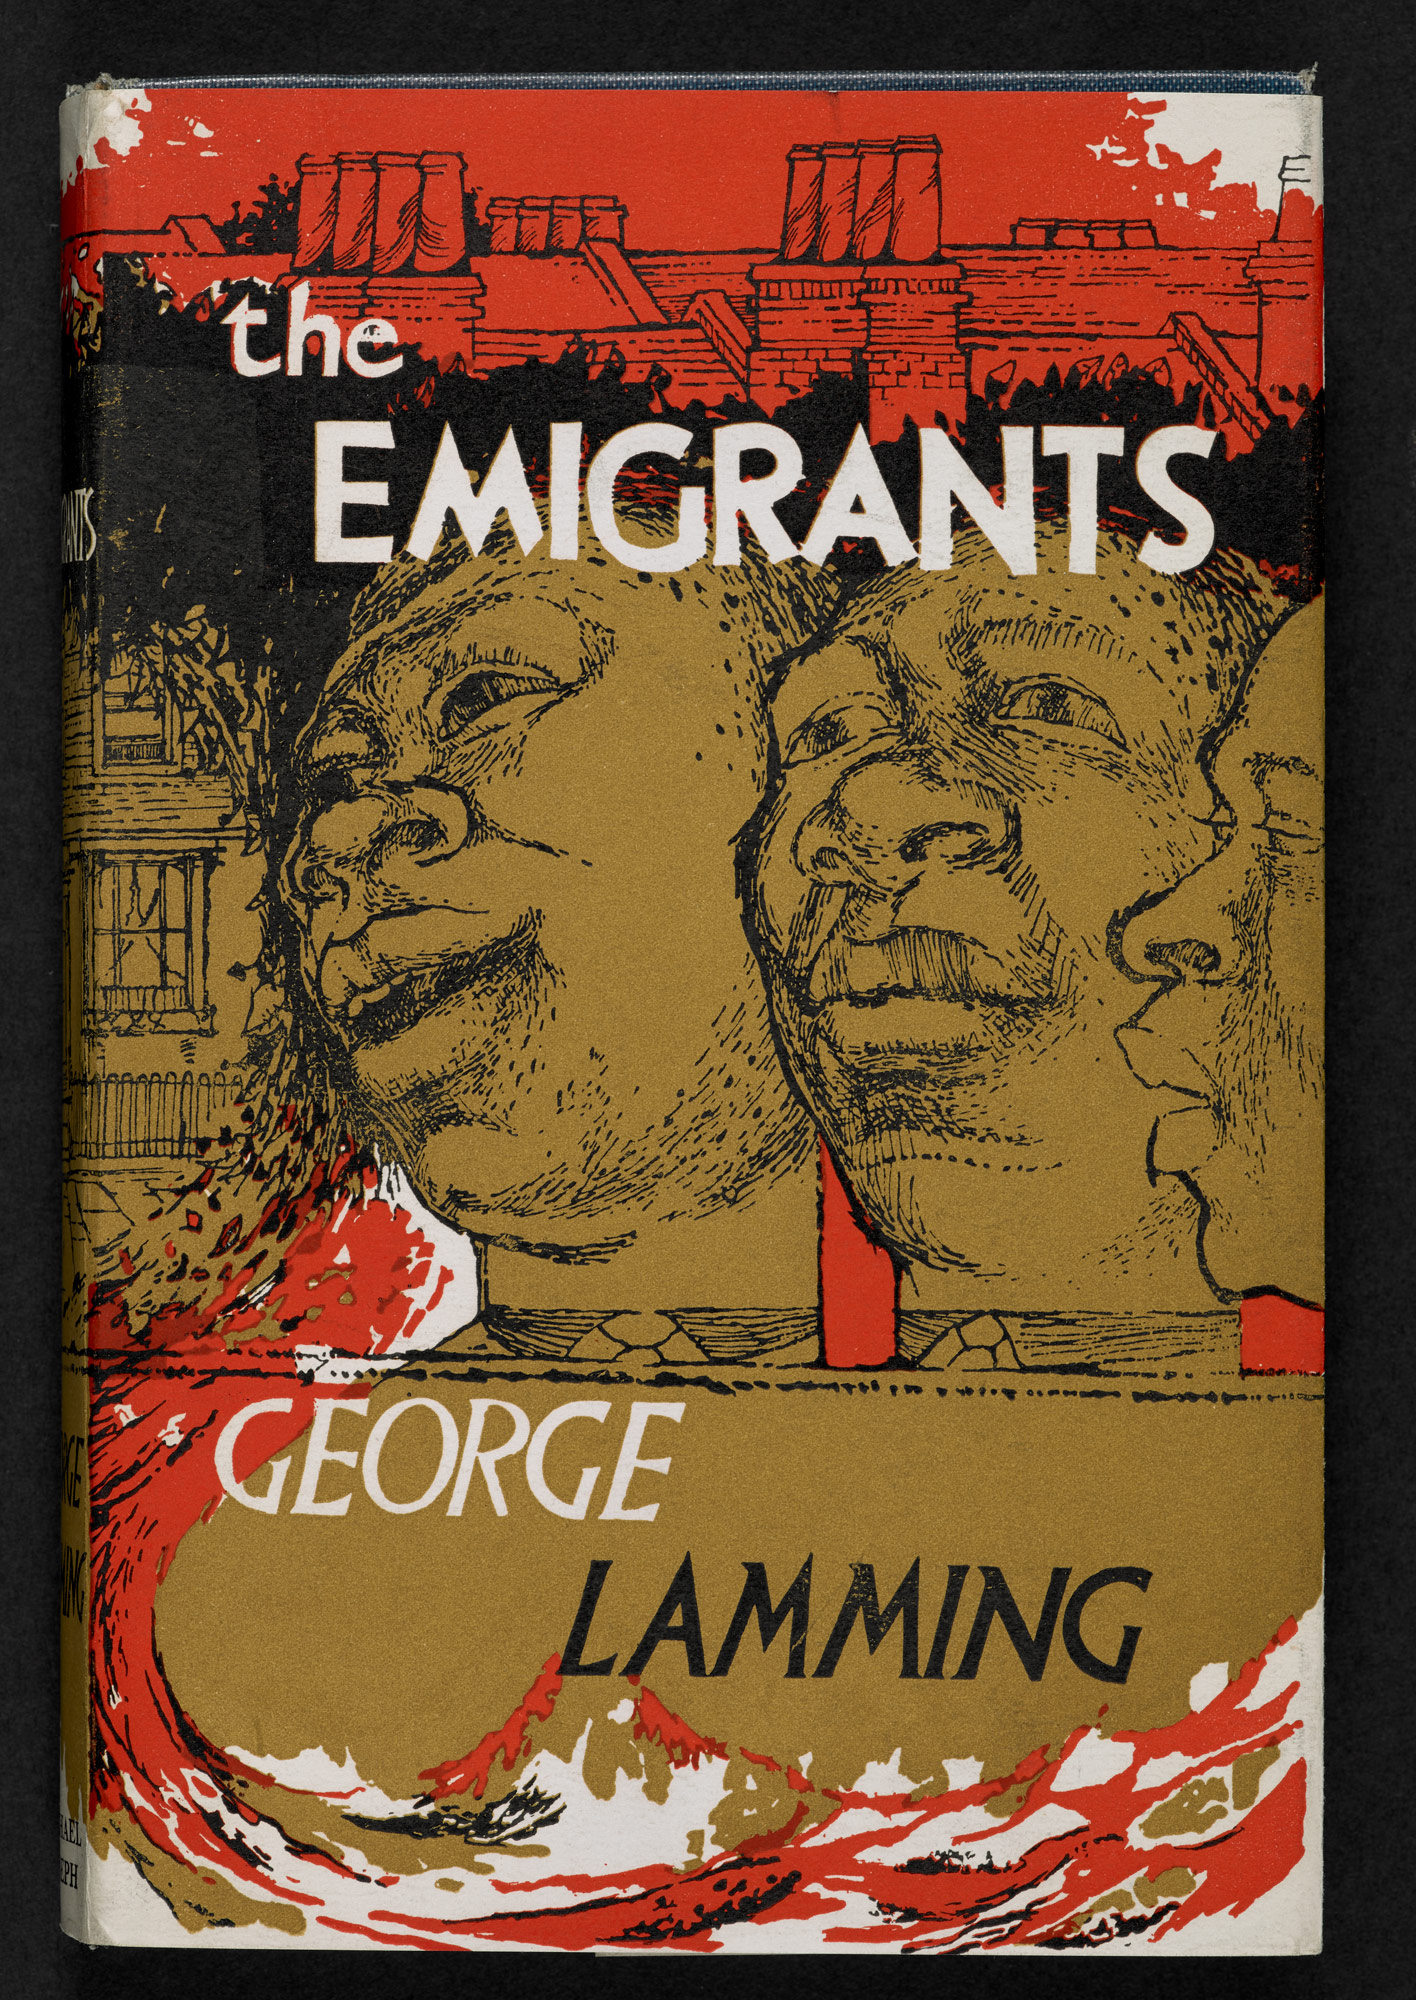 The-Emigrants-by-George-Lammings-aad_1995_8_31_433_front_cover